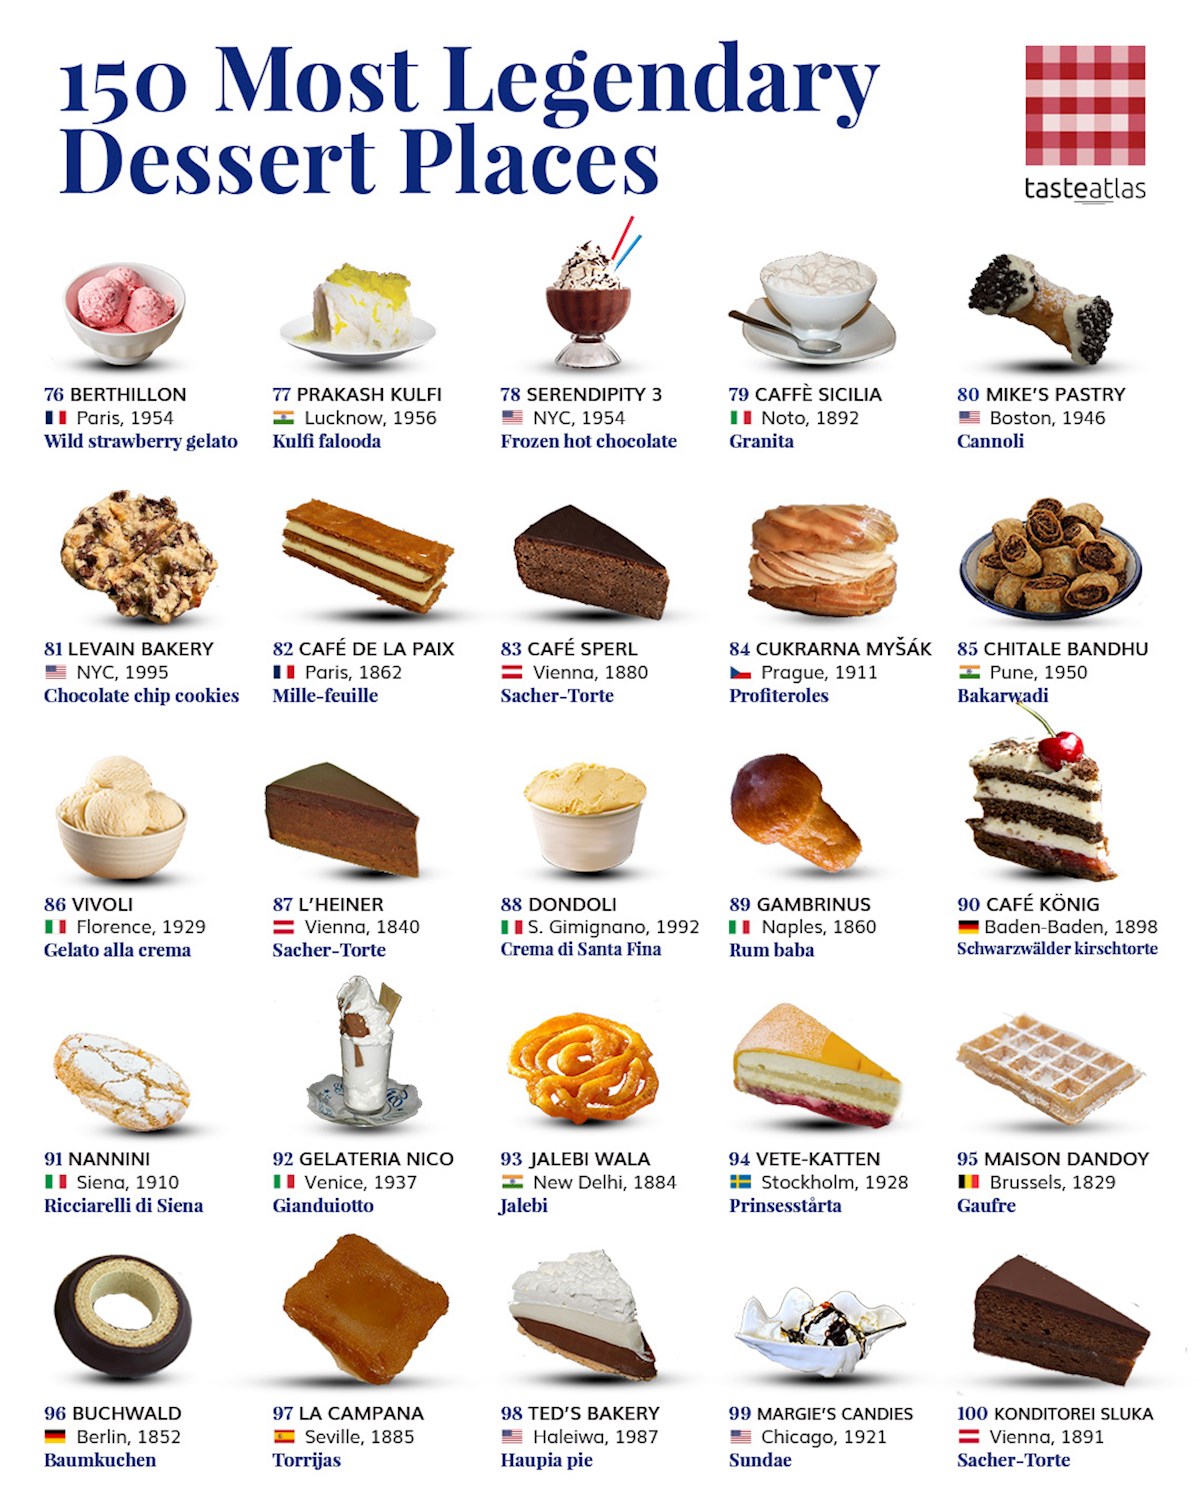 150 Most Legendary Dessert Places in the World